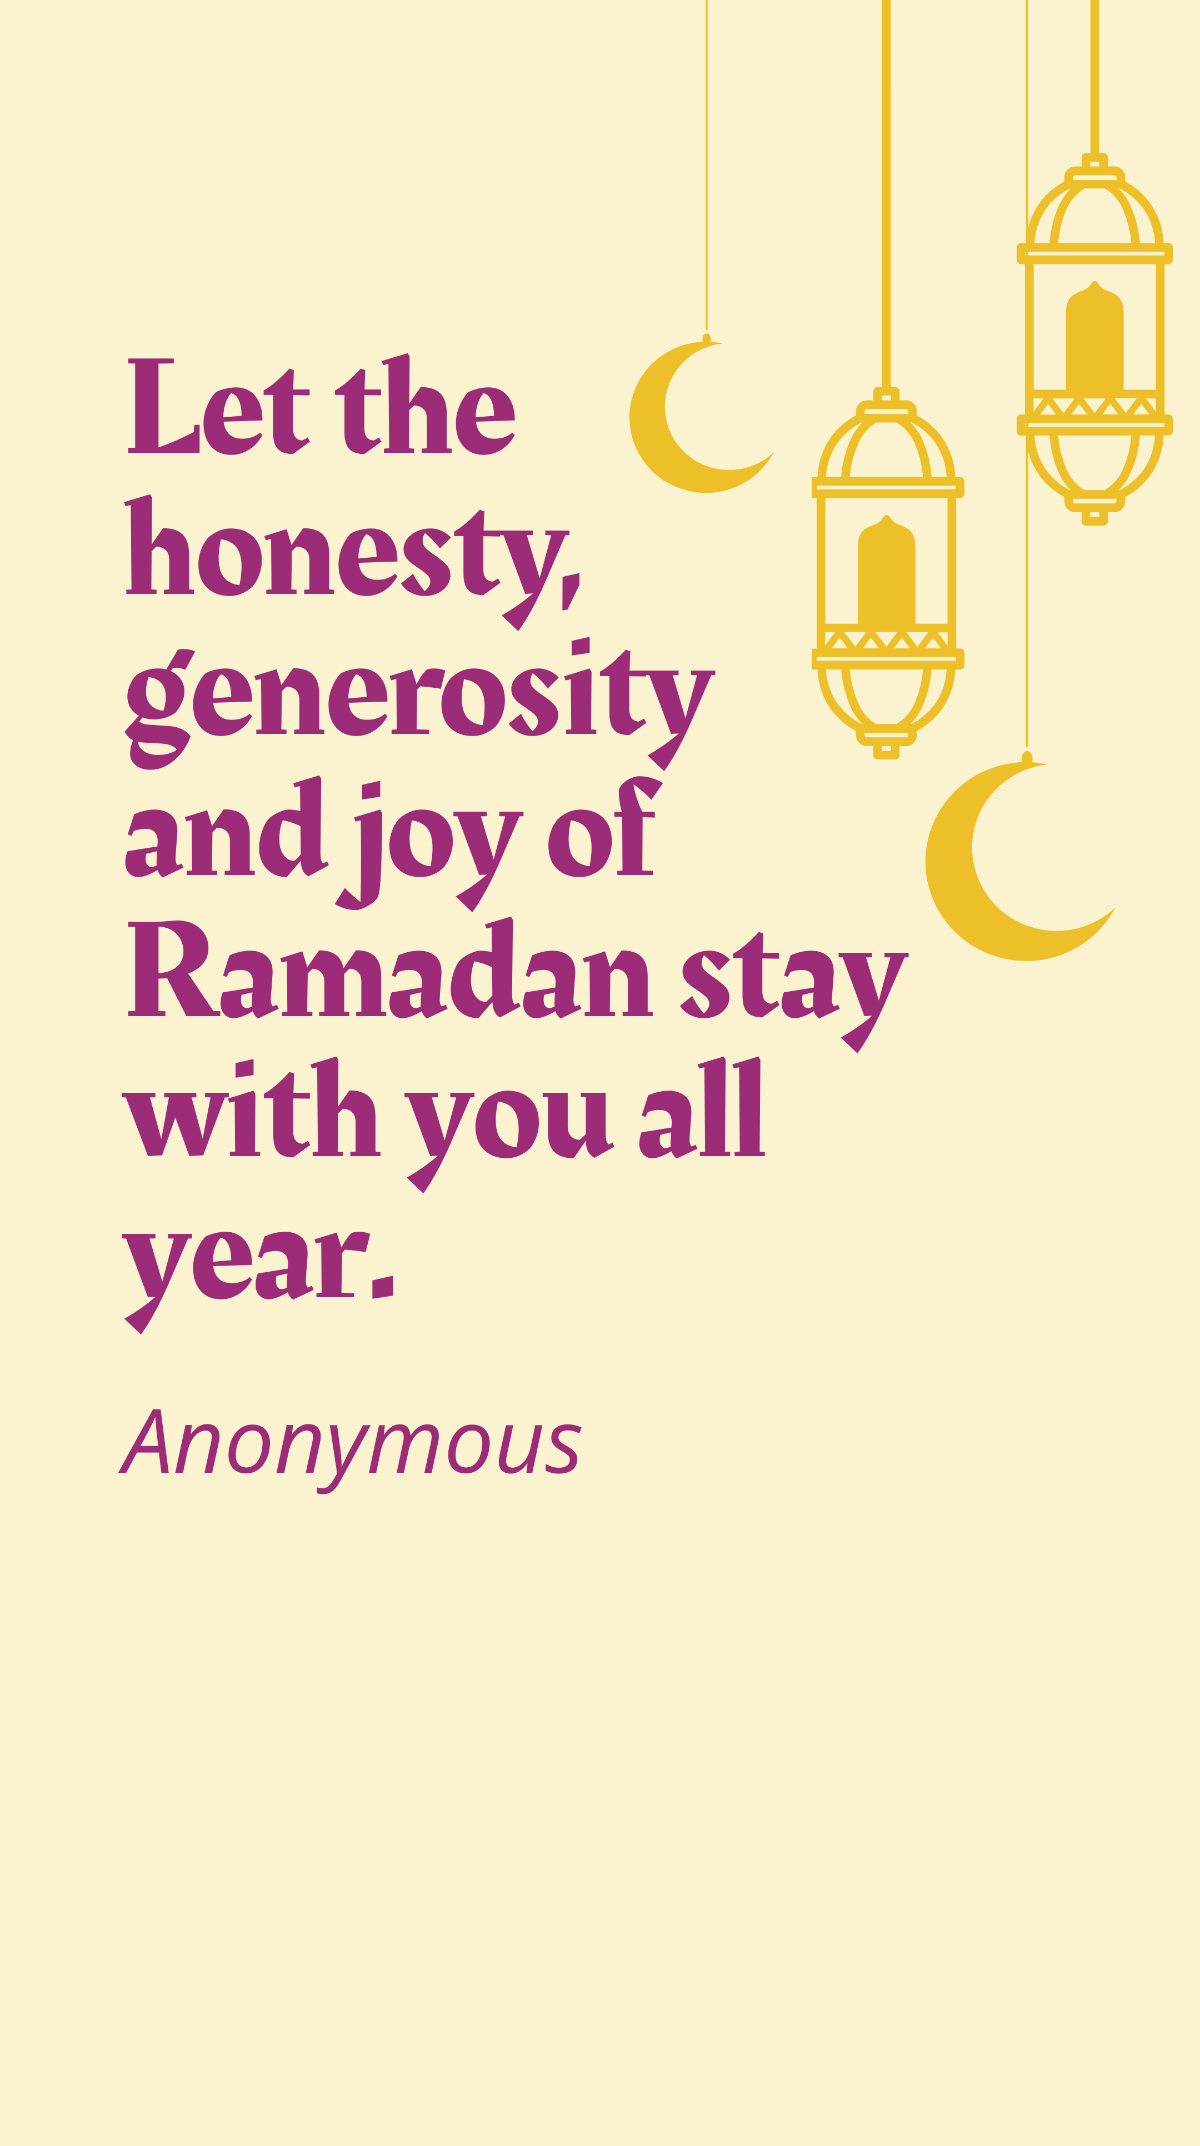 Anonymous - Let the honesty, generosity and joy of Ramadan stay with you all year. Template